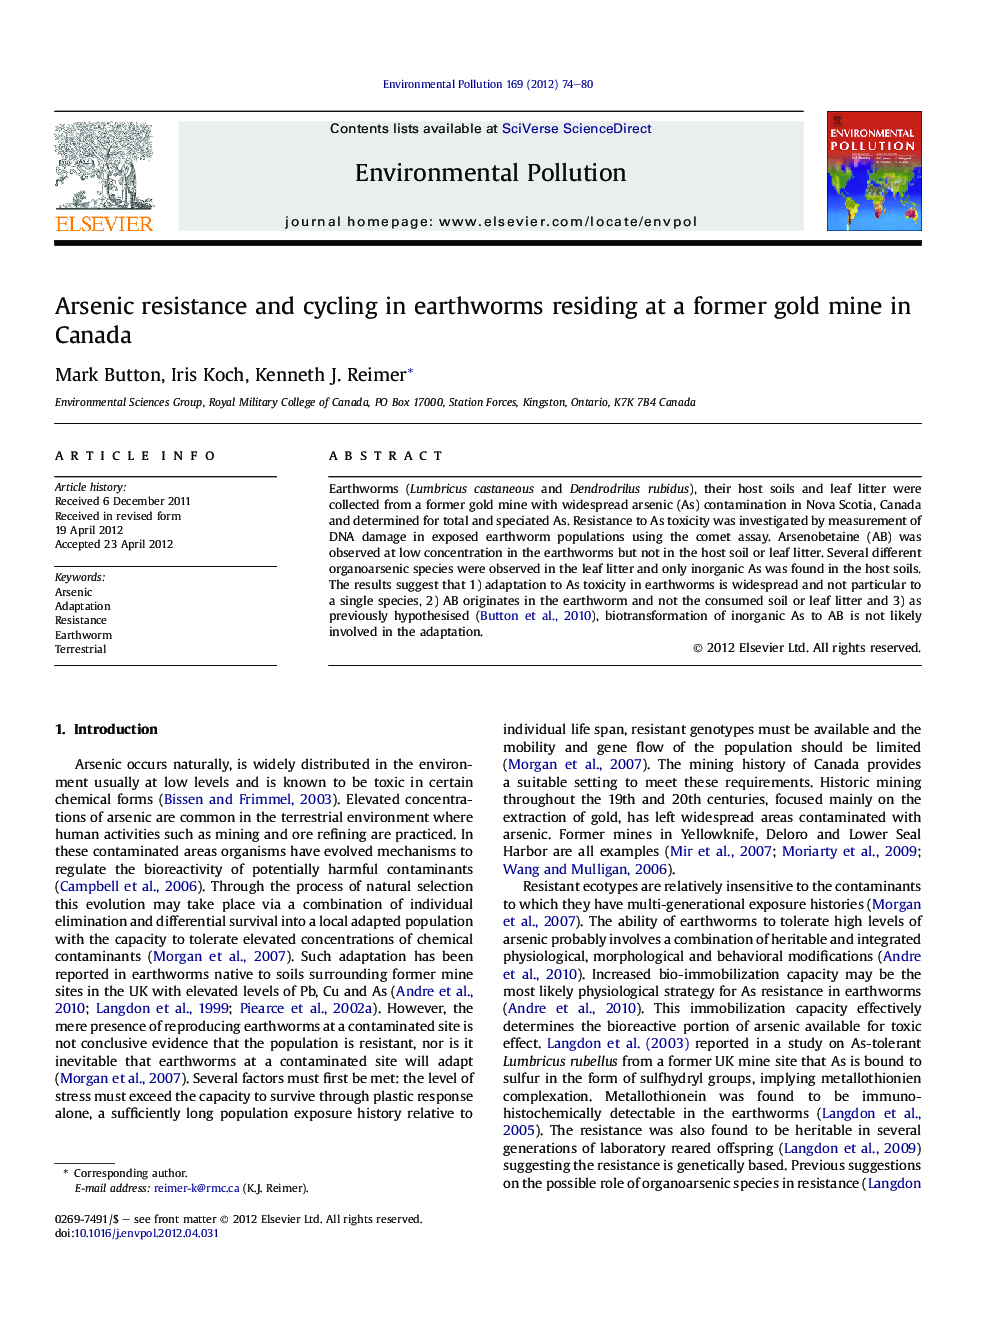 Arsenic resistance and cycling in earthworms residing at a former gold mine in Canada